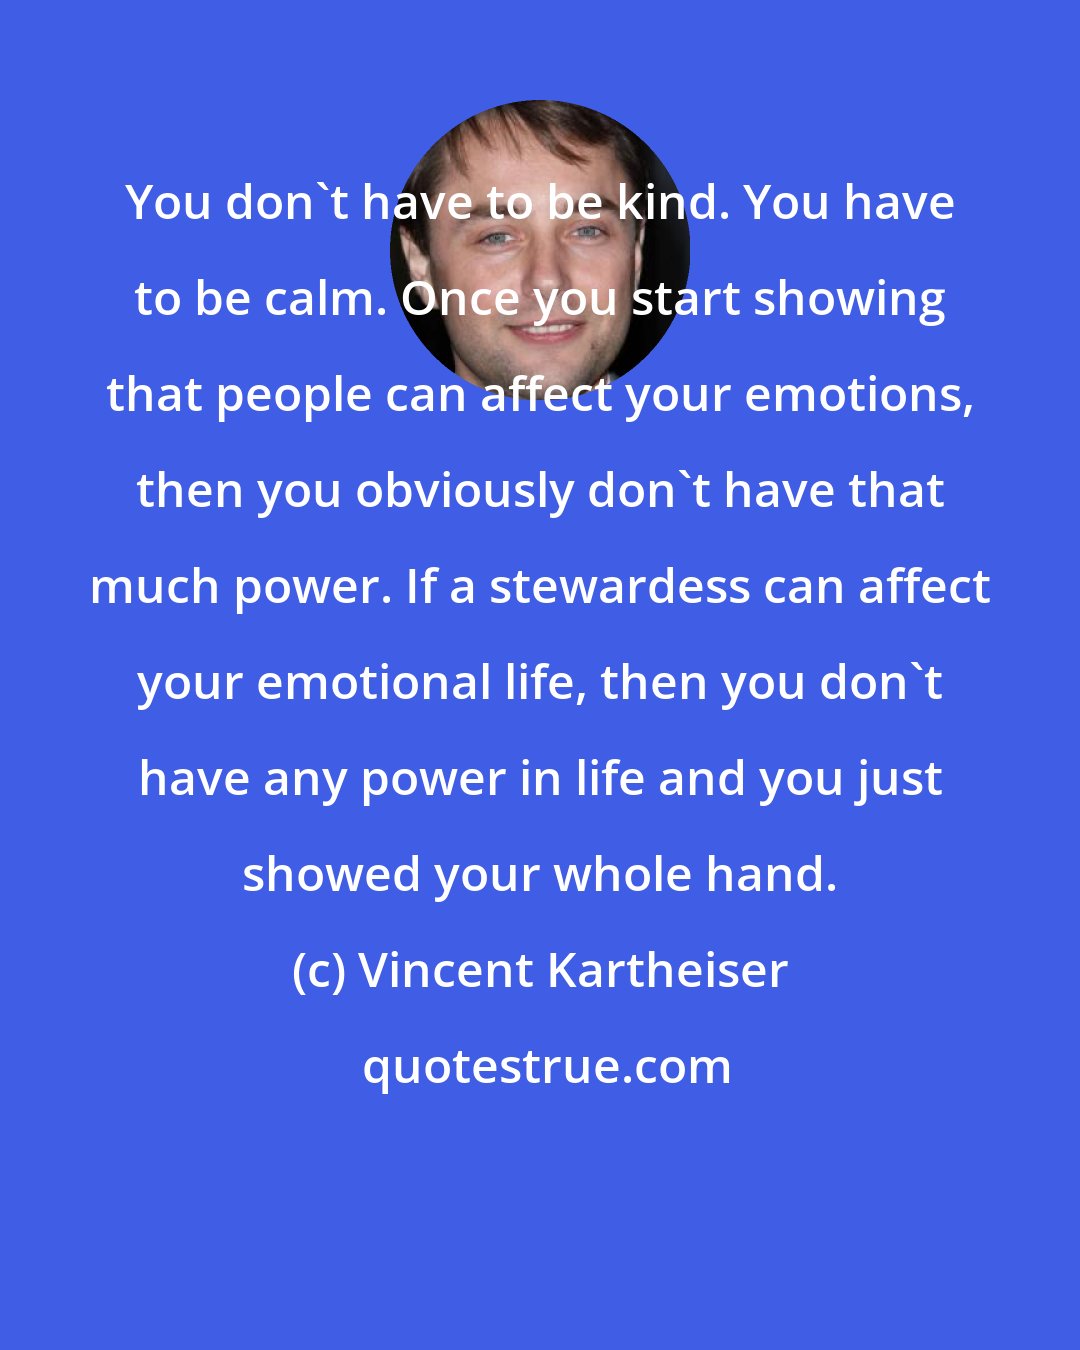 Vincent Kartheiser: You don't have to be kind. You have to be calm. Once you start showing that people can affect your emotions, then you obviously don't have that much power. If a stewardess can affect your emotional life, then you don't have any power in life and you just showed your whole hand.